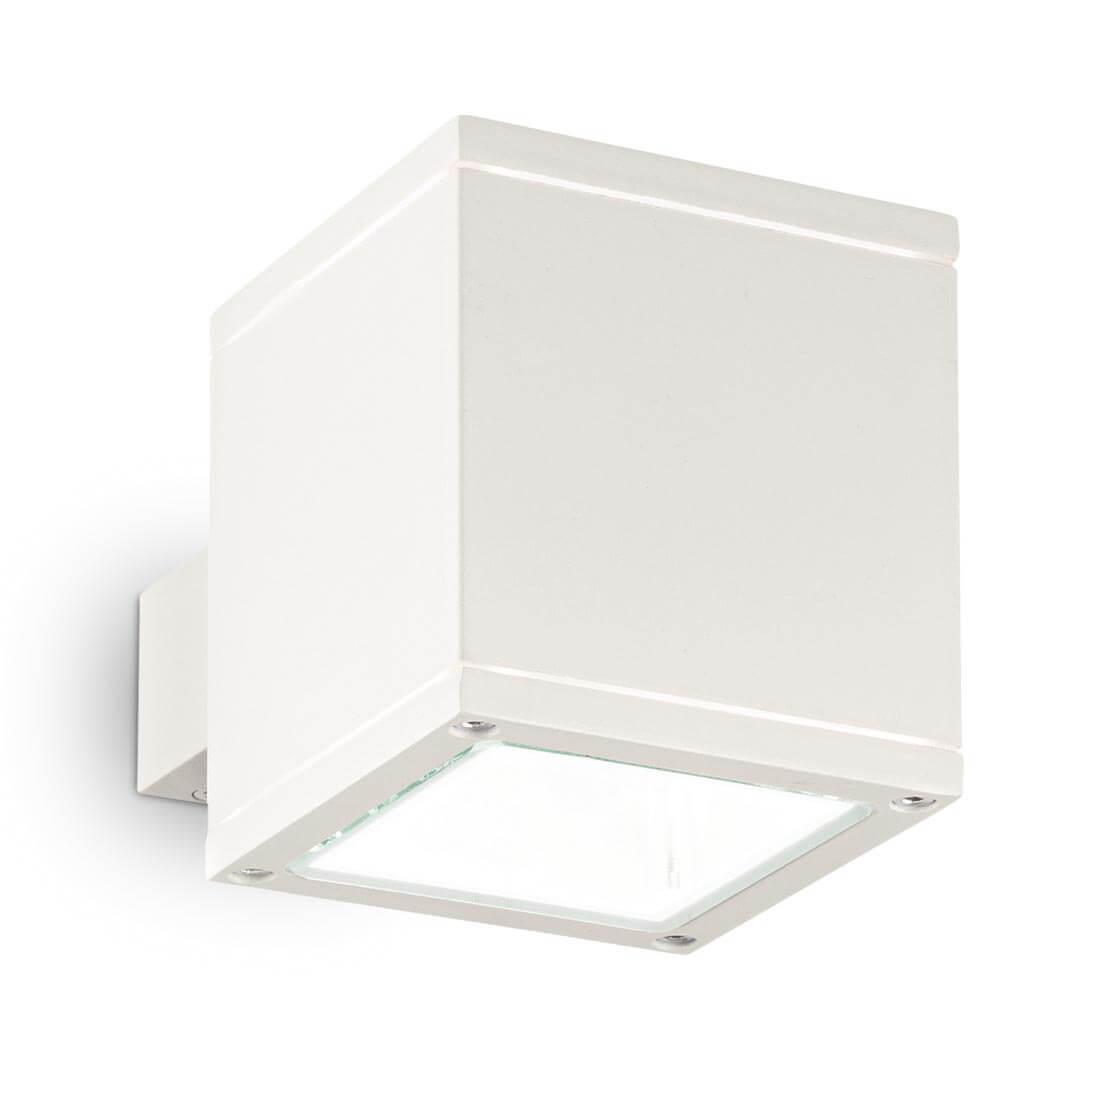    Ideal Lux Snif Ap1 Square Bianco 144276